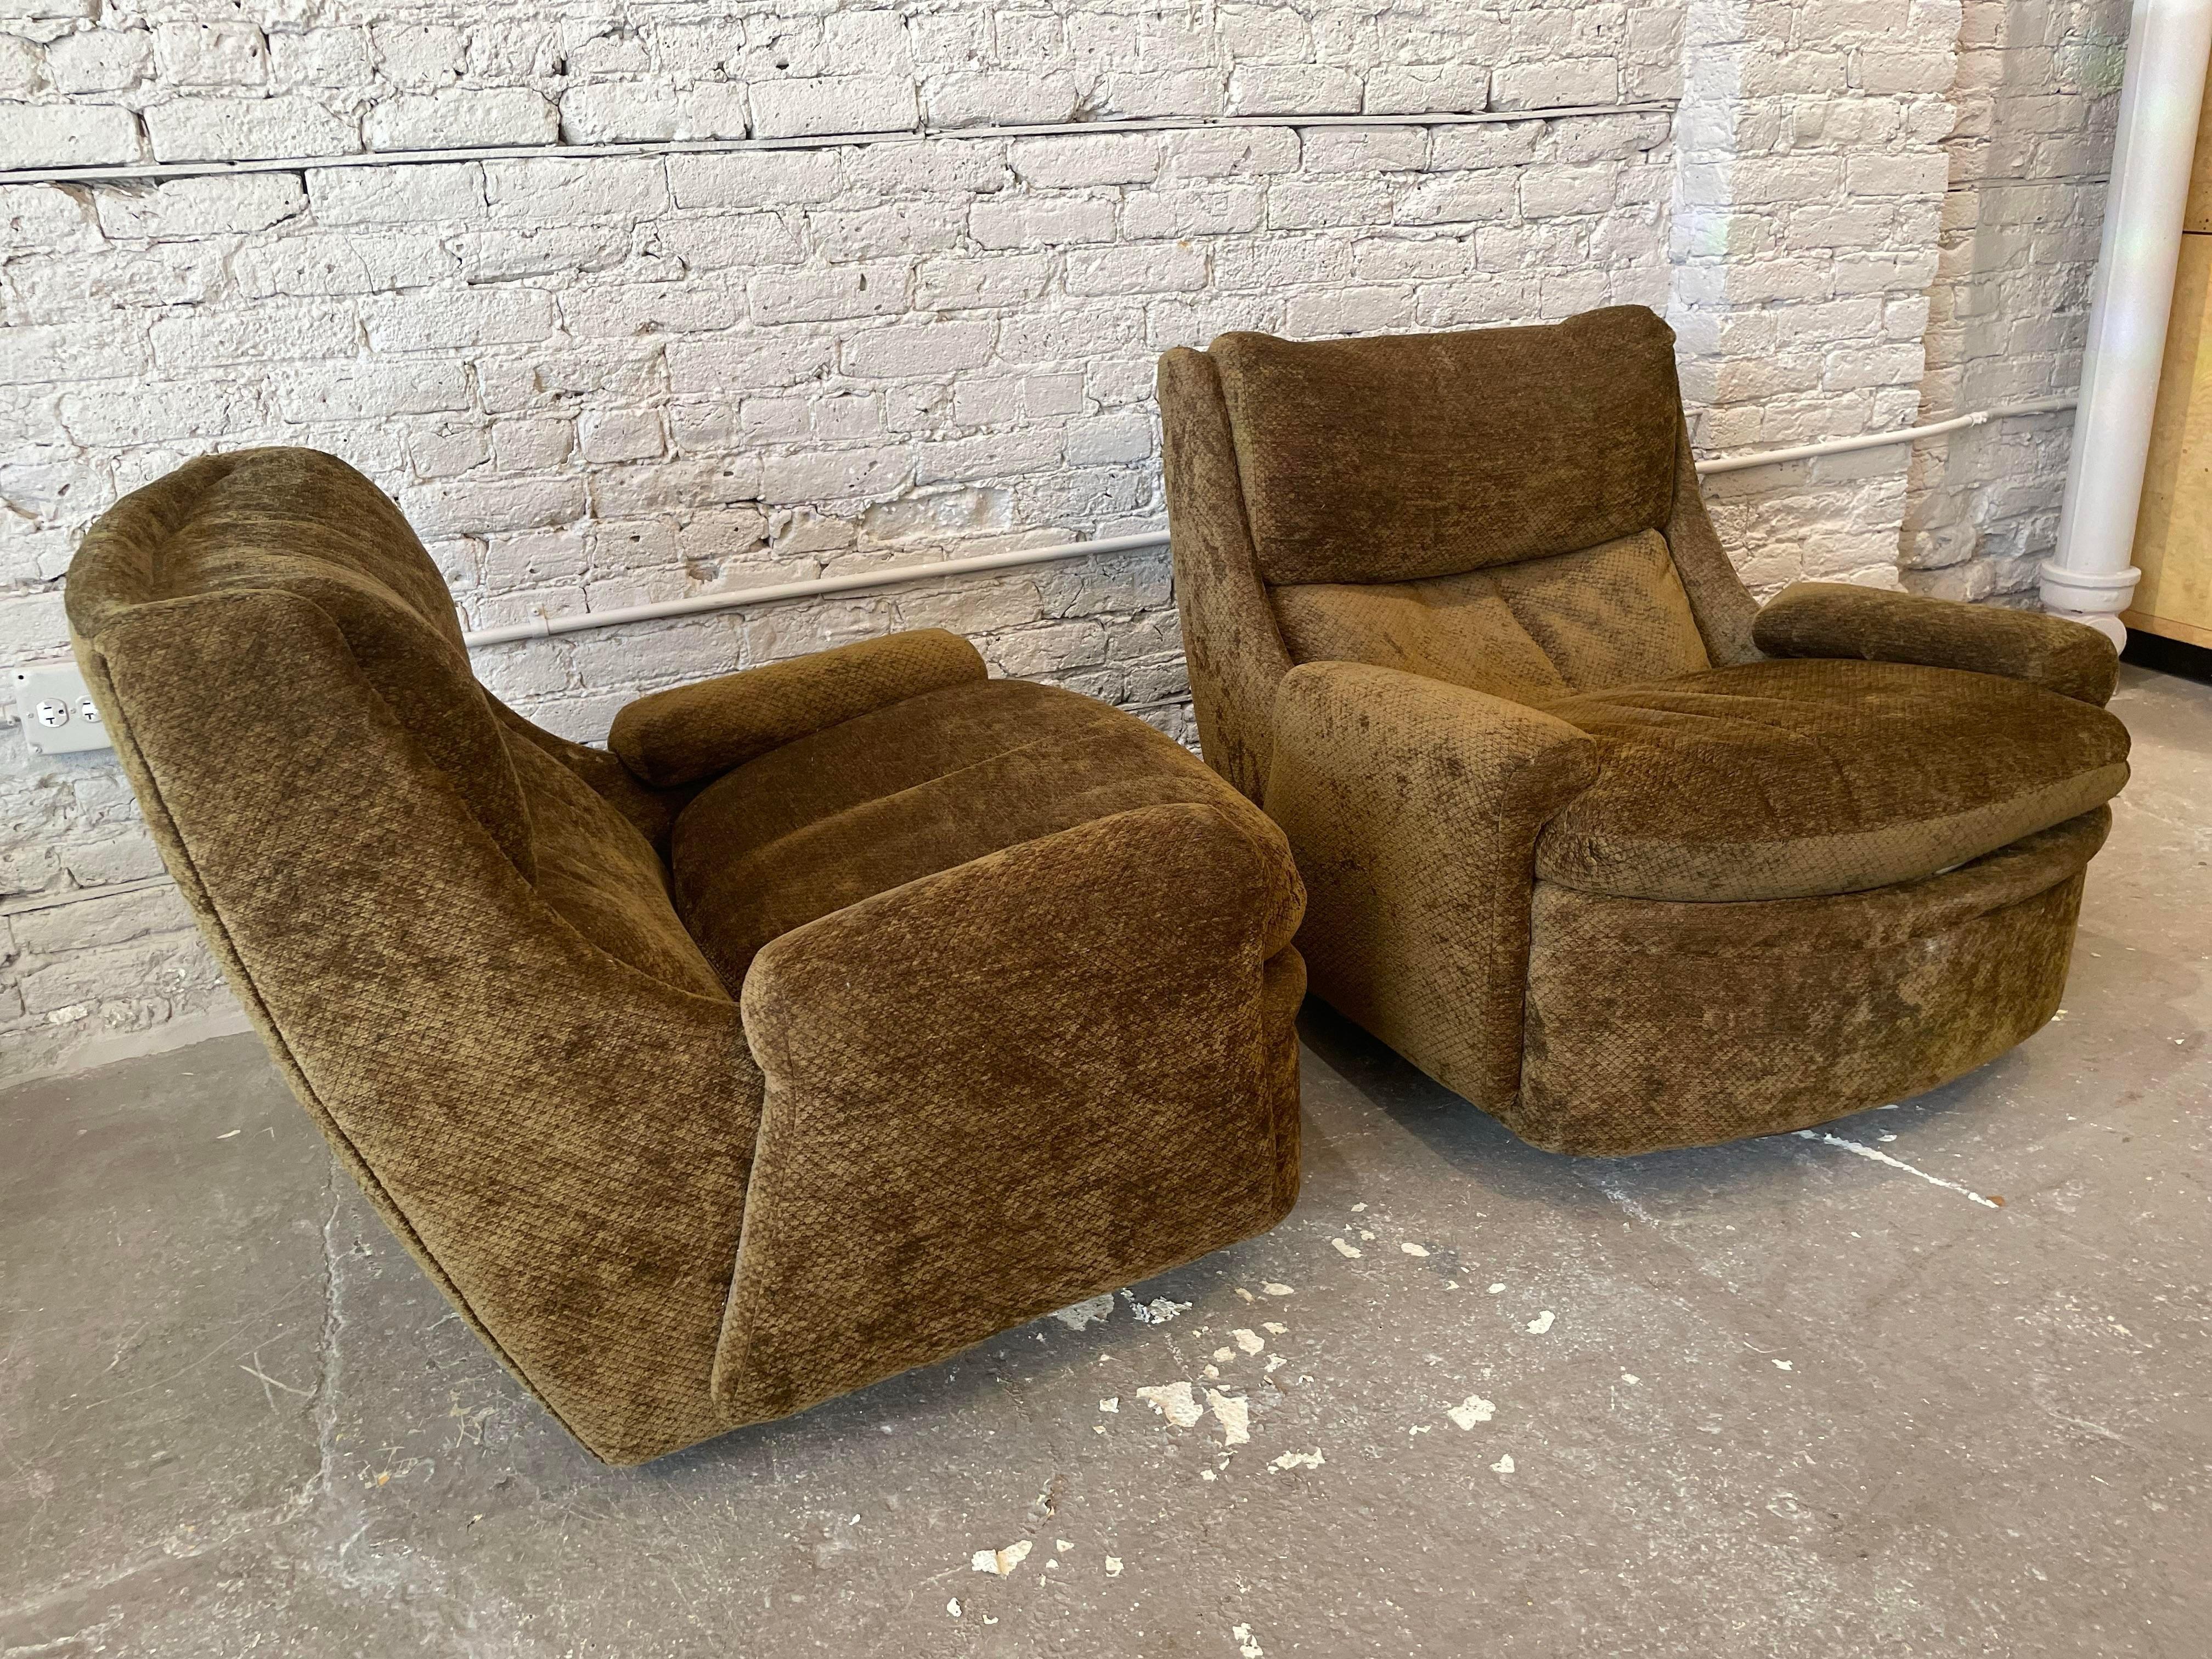 1980s Postmodern Sculptural Arc Chairs - a Pair In Good Condition For Sale In Chicago, IL